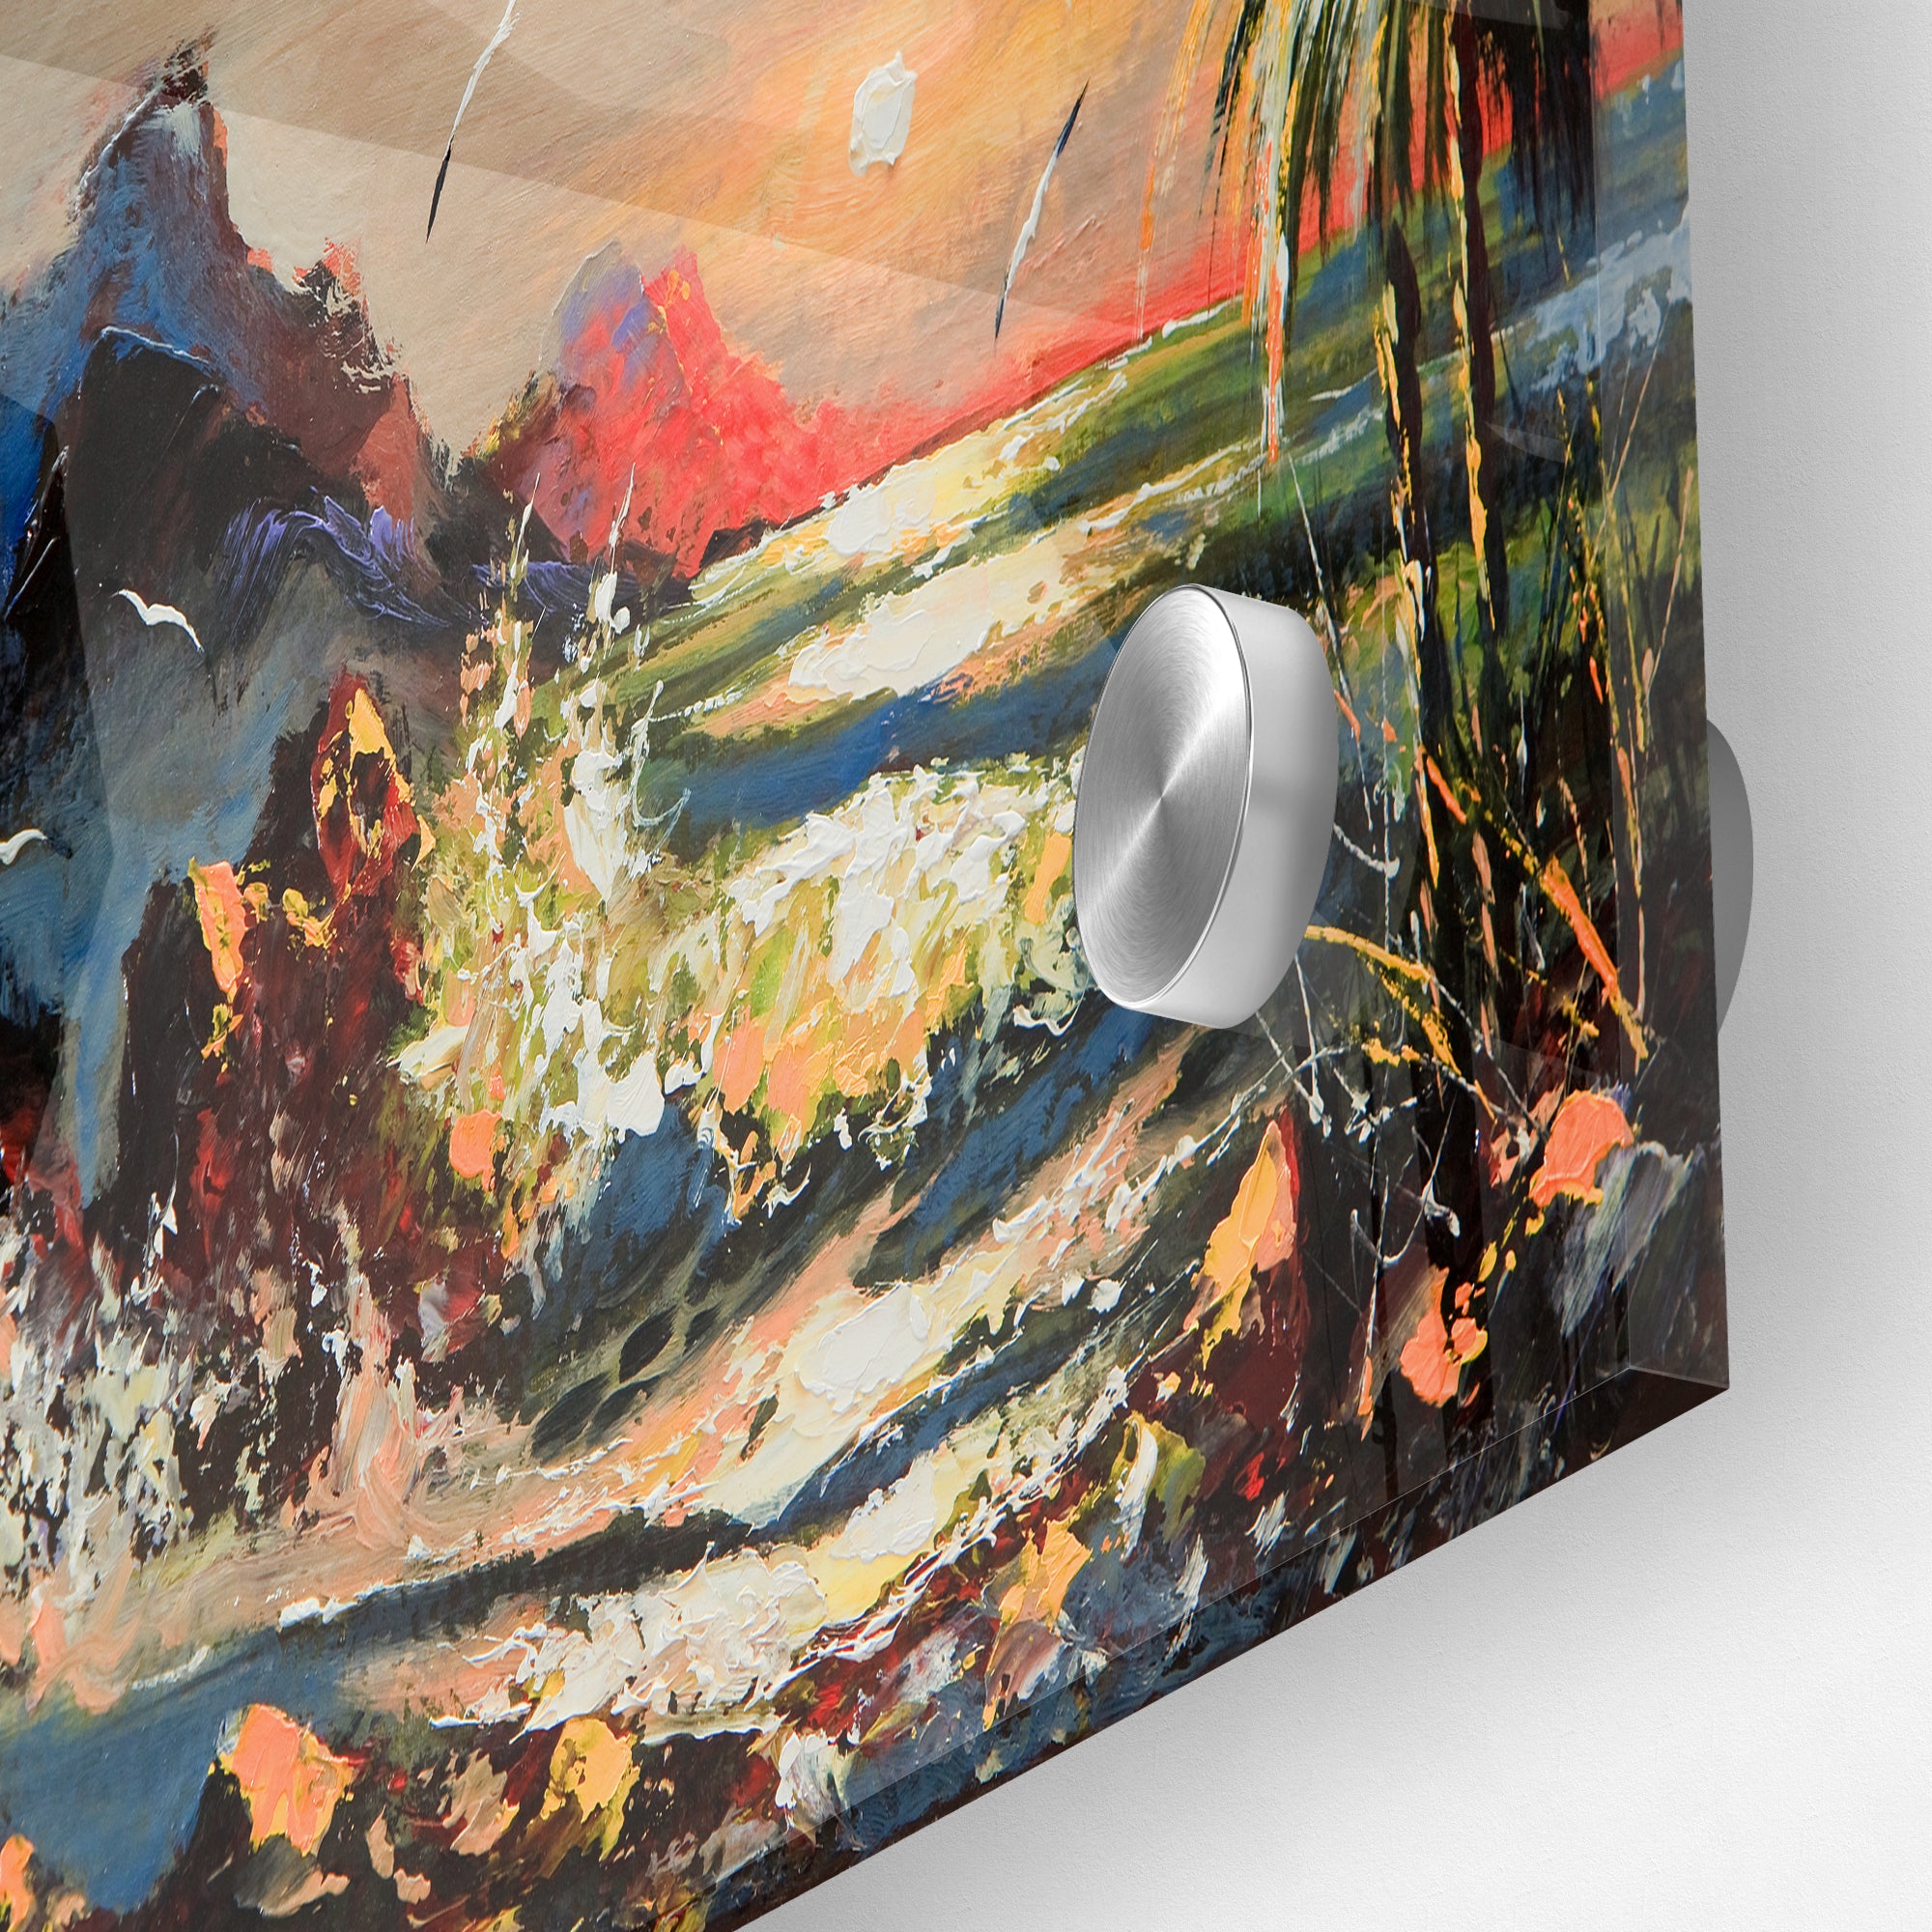 The Sunset Abstract Wall Painting